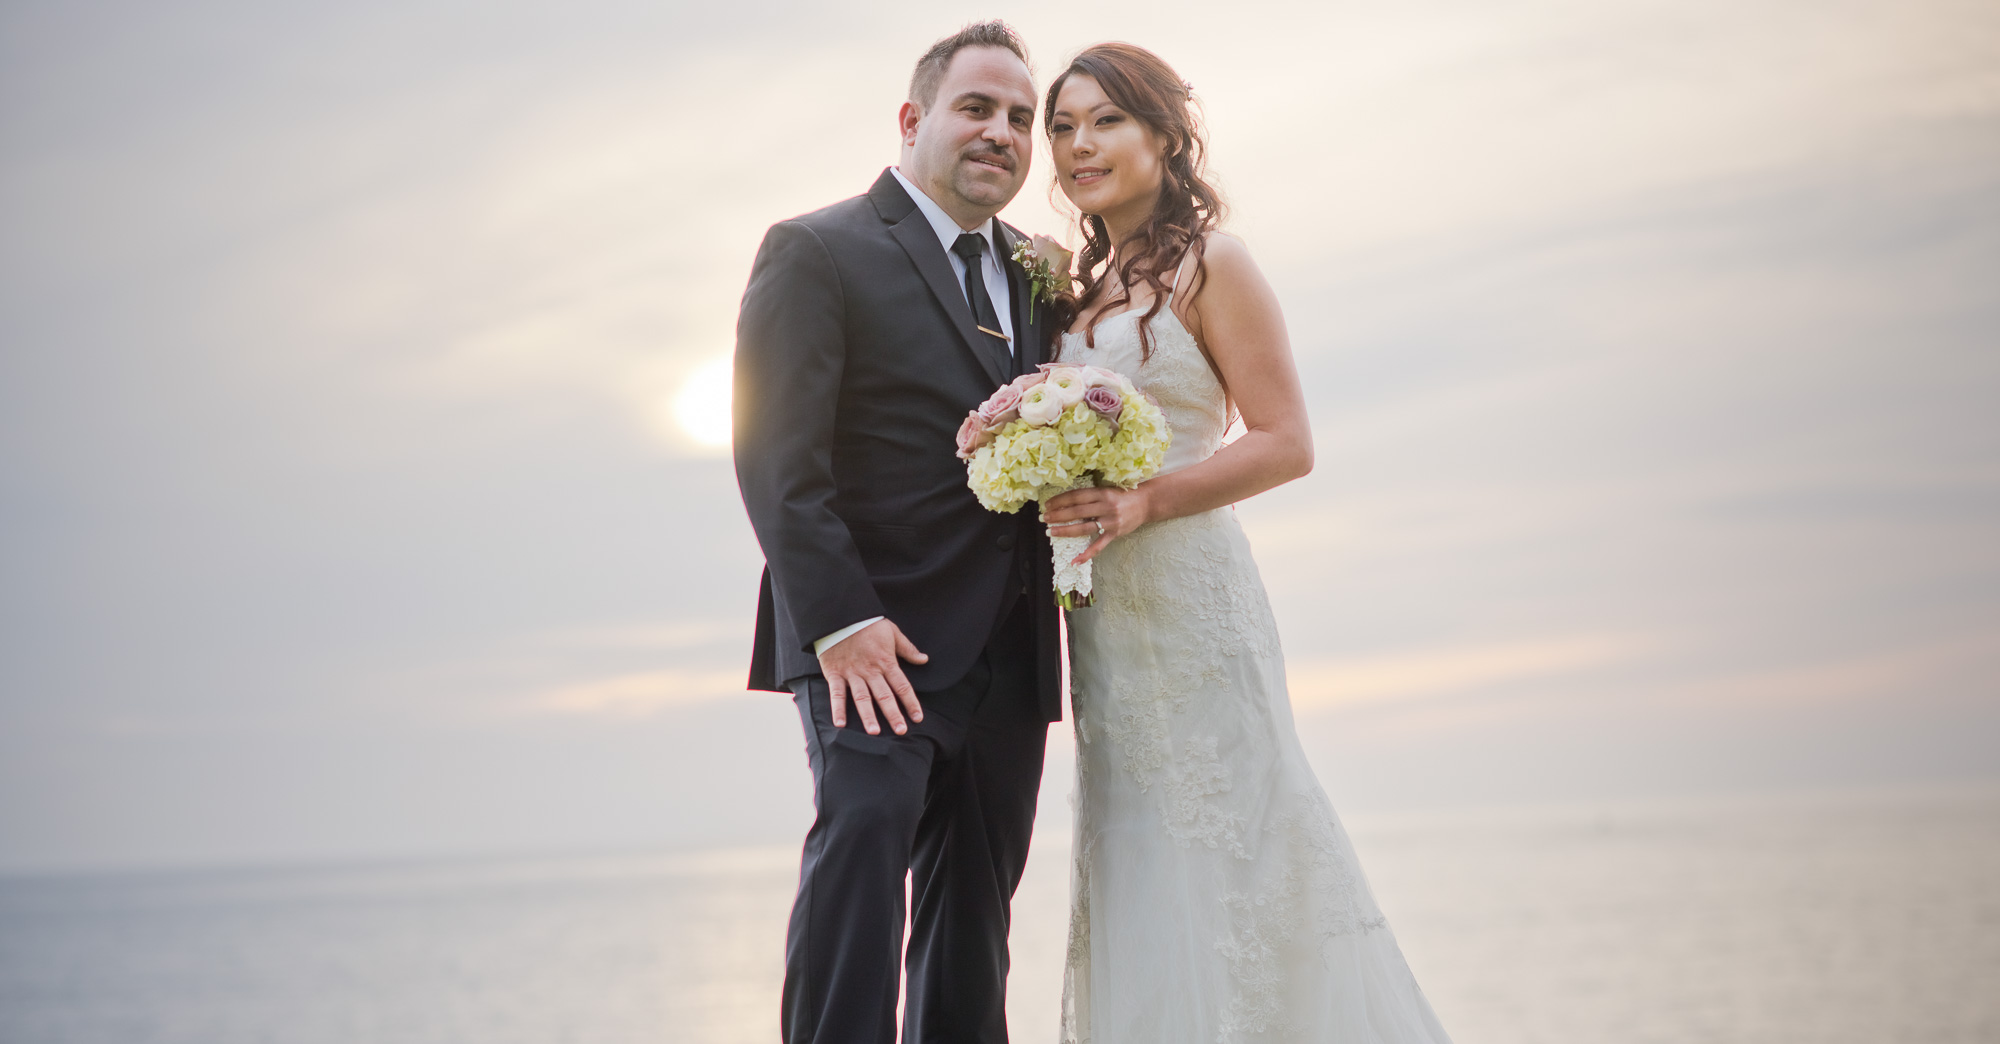 Christy & Mike’s Redondo Beach Historic Library Wedding featured slider image